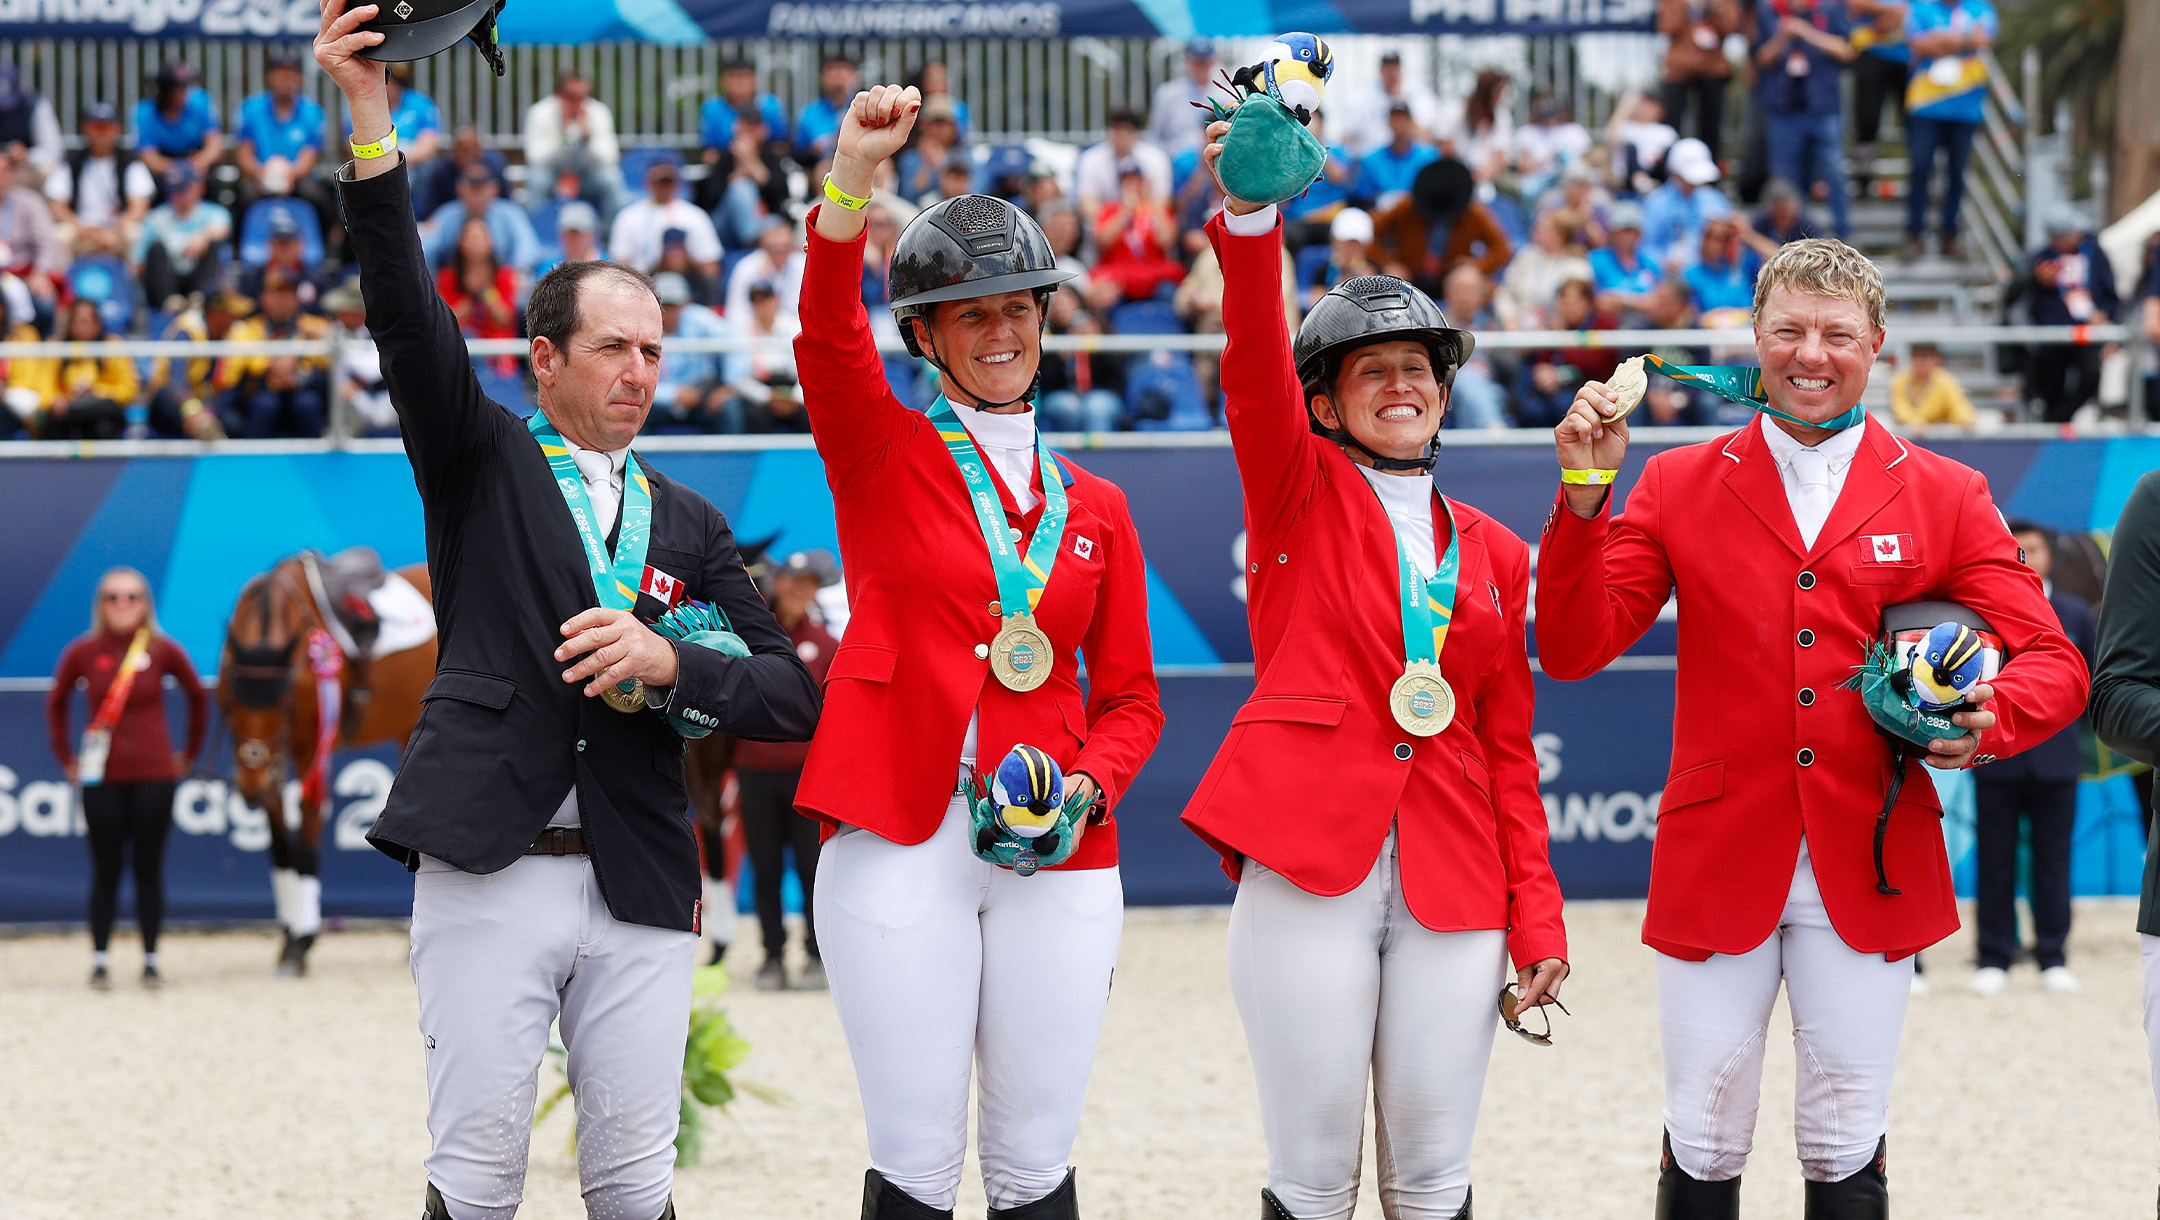 Four horseback riders in Team Canada red and black jacketes and white pants wave to a crowd.